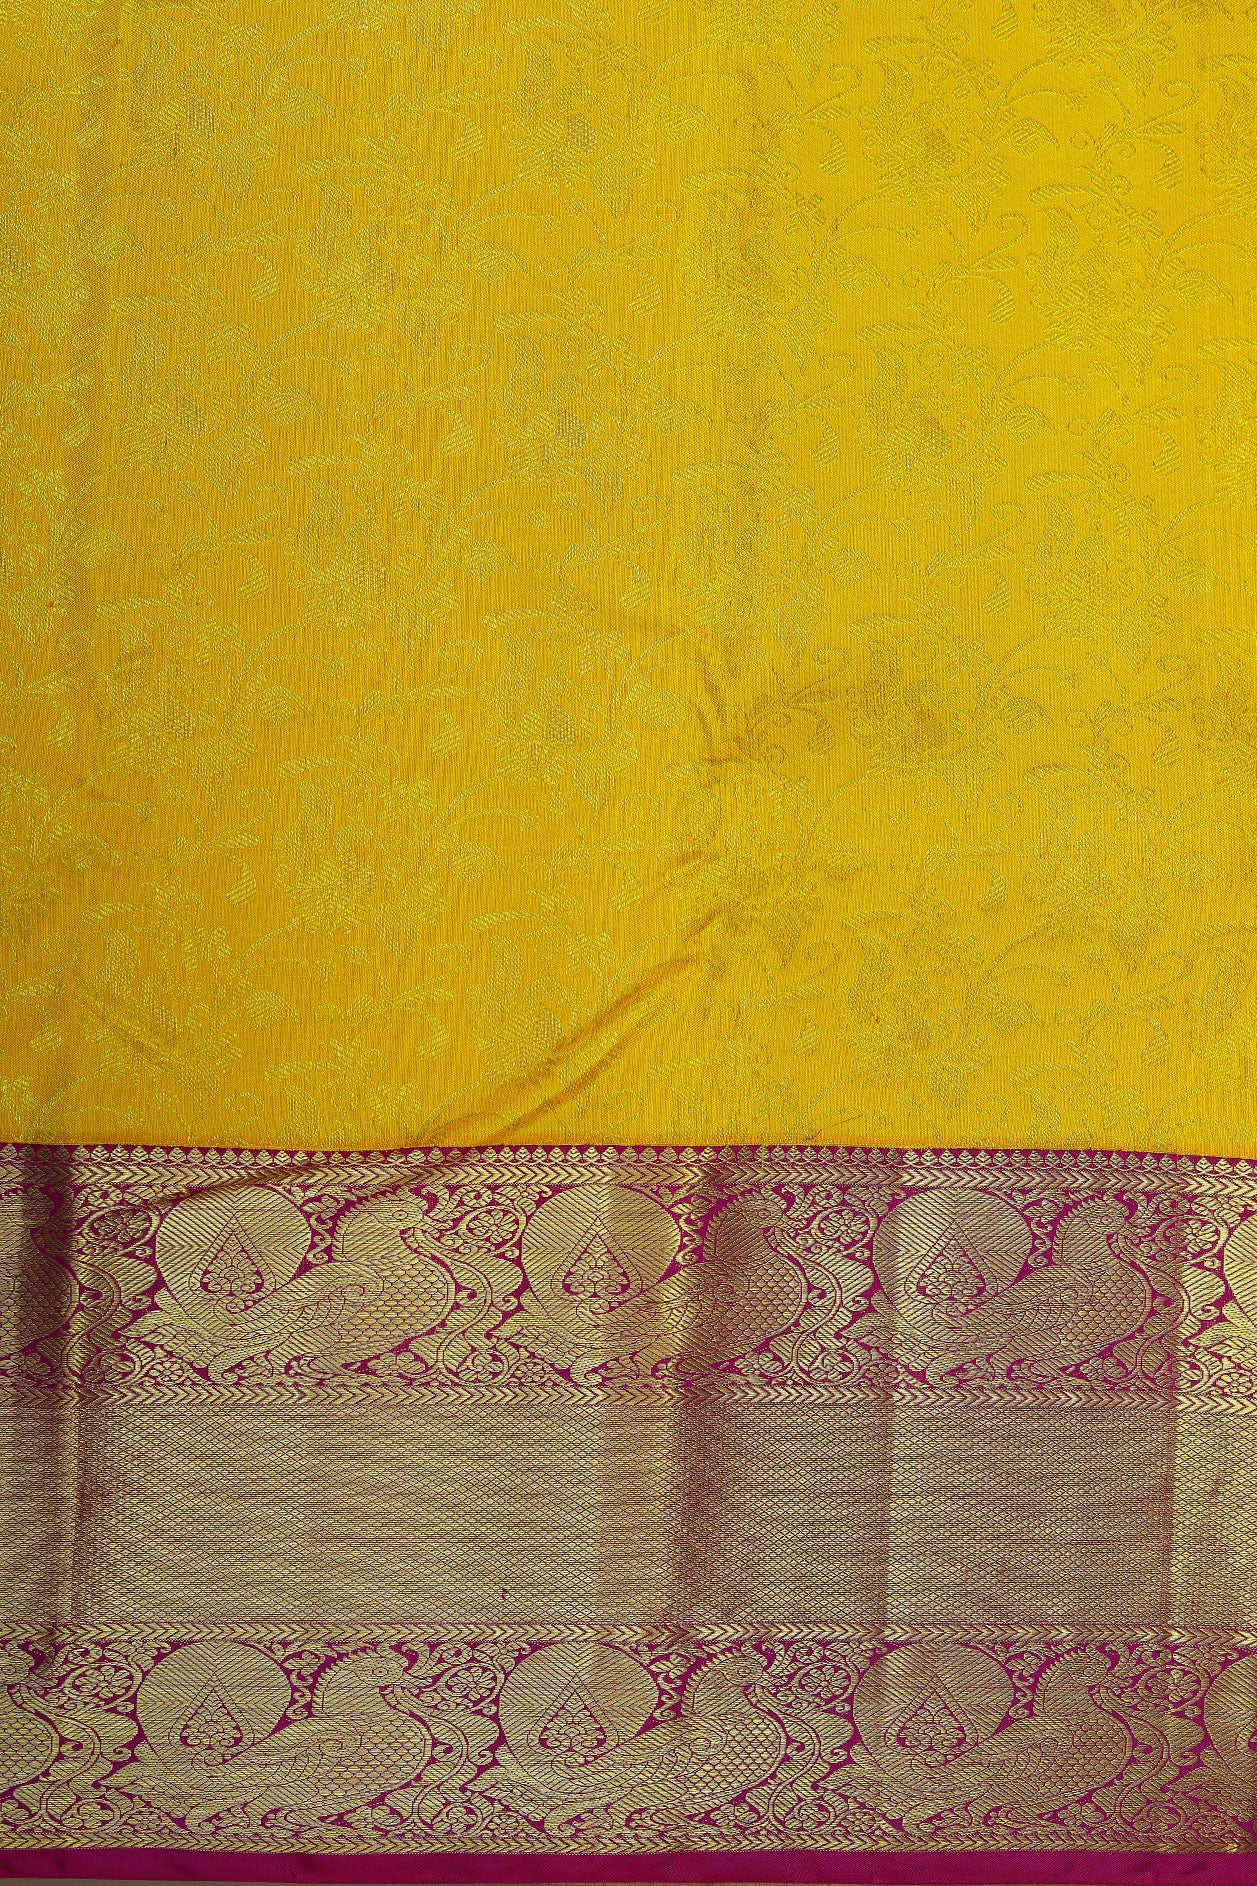 Big Contrast Traditional Border With Floral And Peacock Design Yellow Kanchipuram Silk Saree